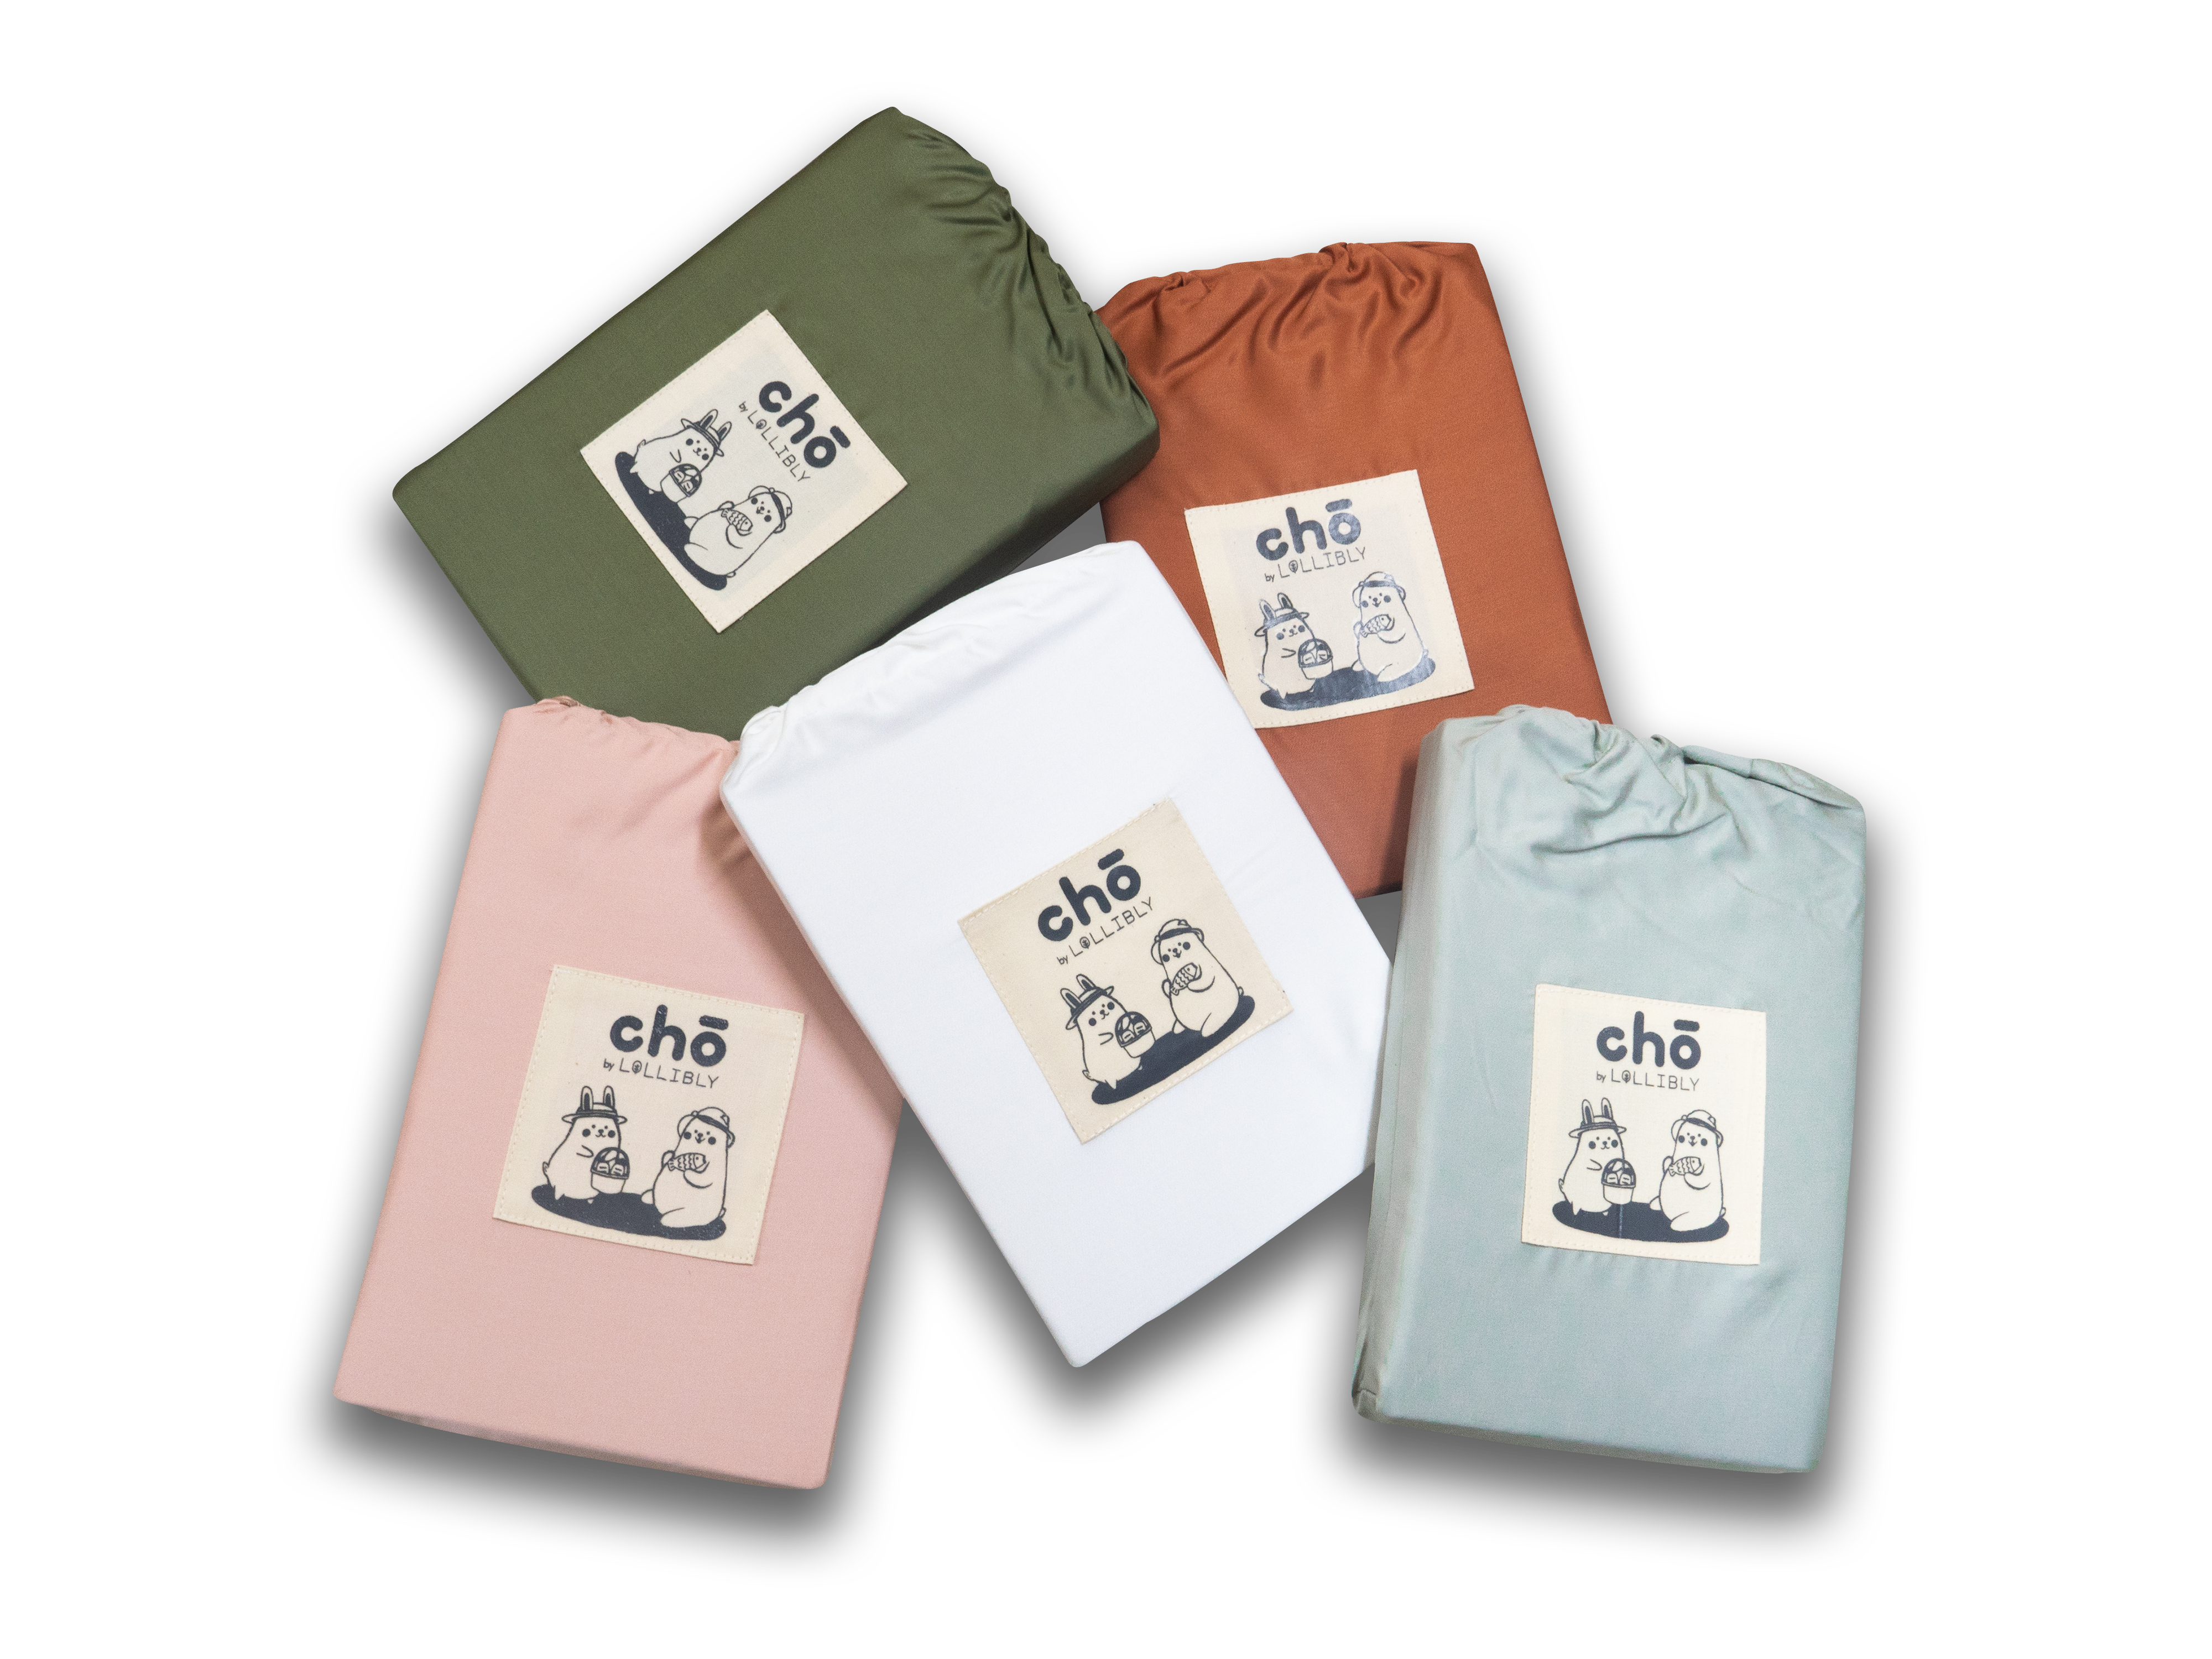 all cho crib and cot sheet in packaging